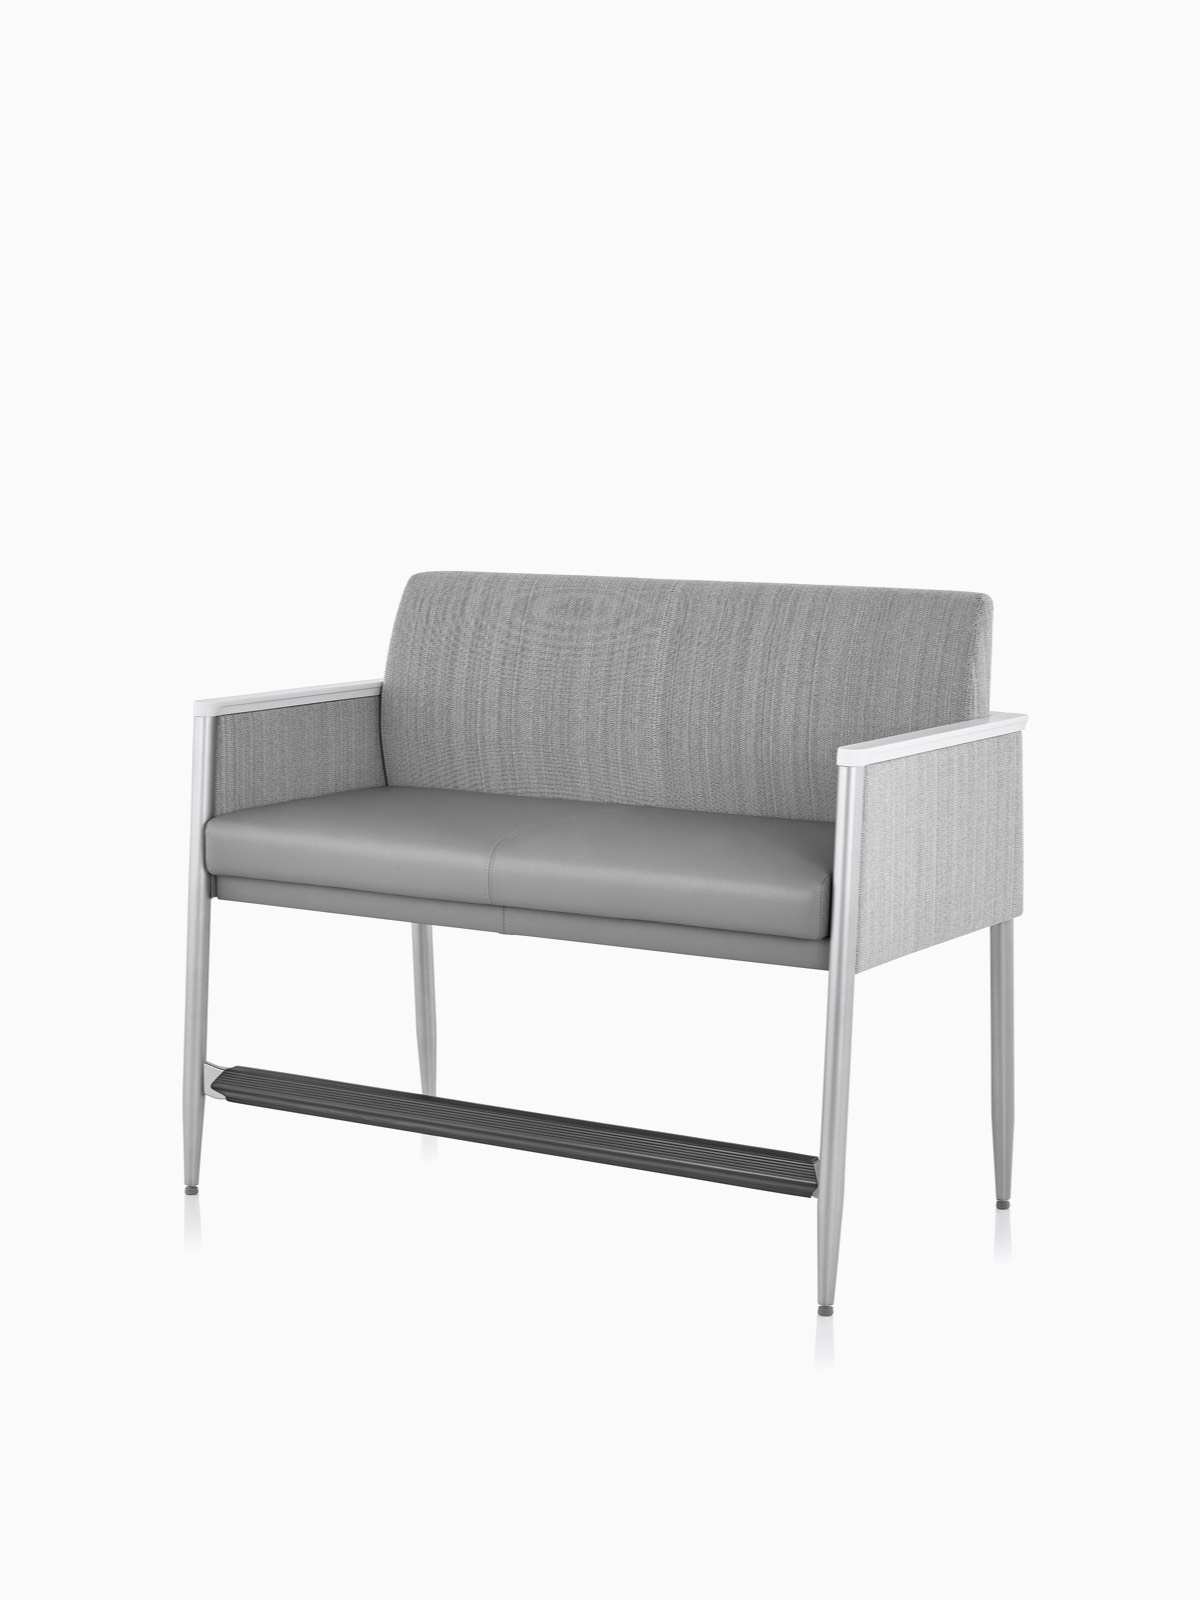 Nemschoff Palisade Easy Access Plus Seating